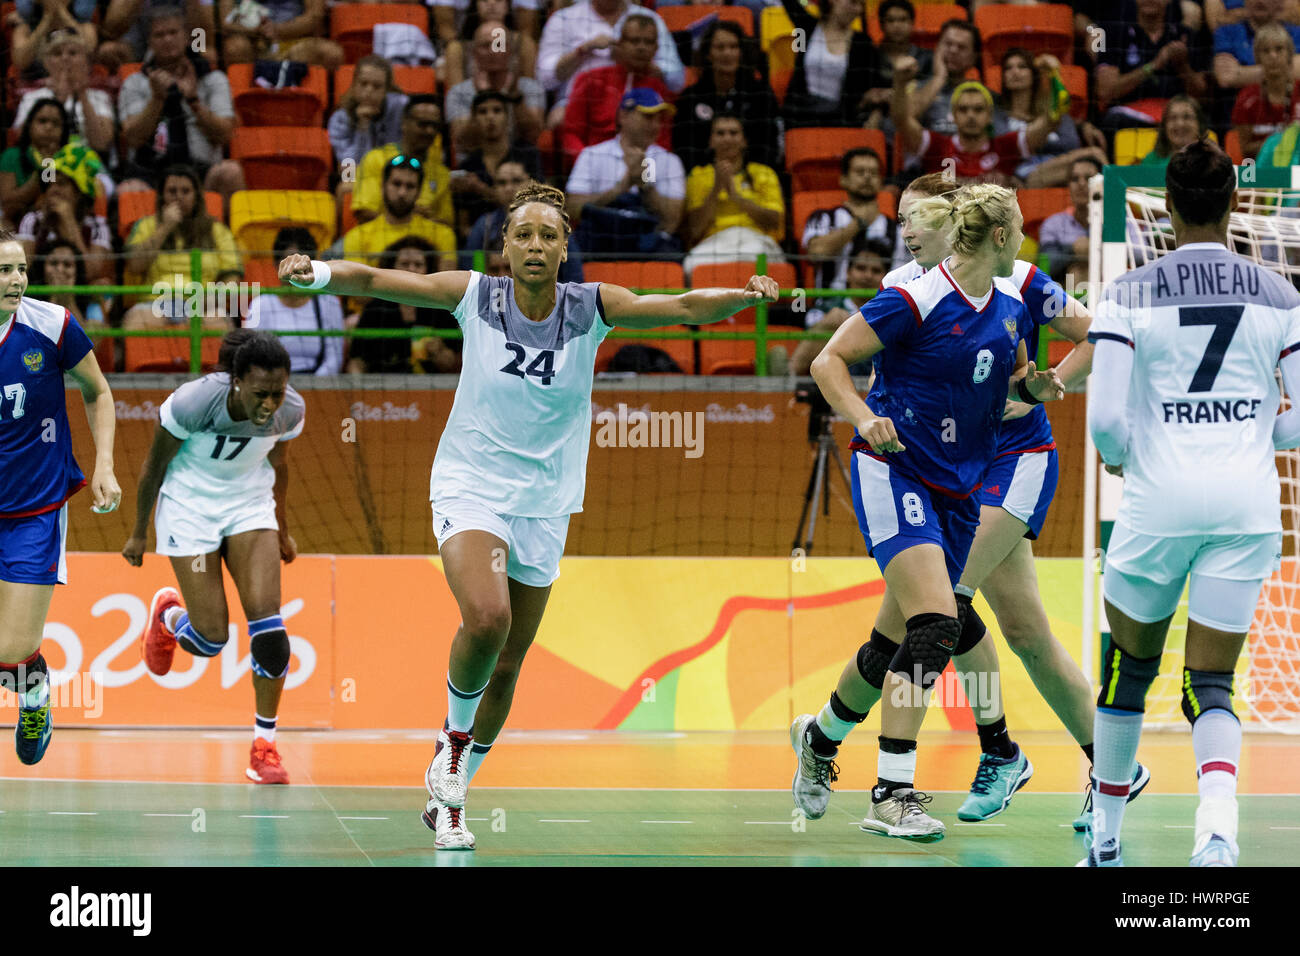 Rio de Janeiro, Brazil. 20 August 2016 Béatrice Edwige (FRA) #24 competes in the women's handball gold medal match Russia vs. France at the 2016 Olymp Stock Photo